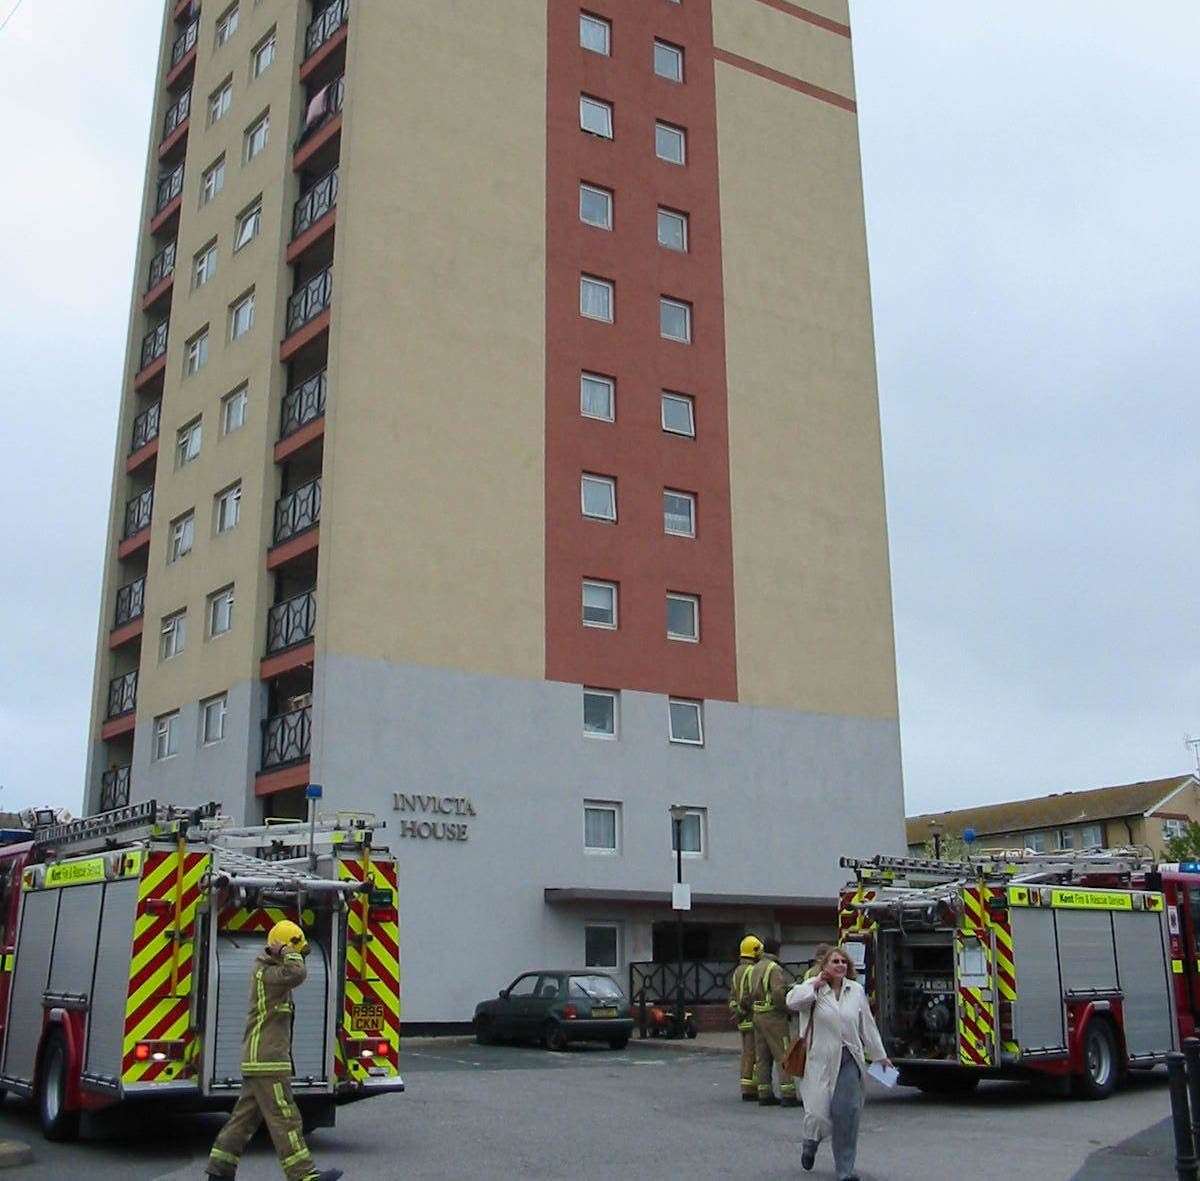 Fire at Invicta House during a blaze in 2007